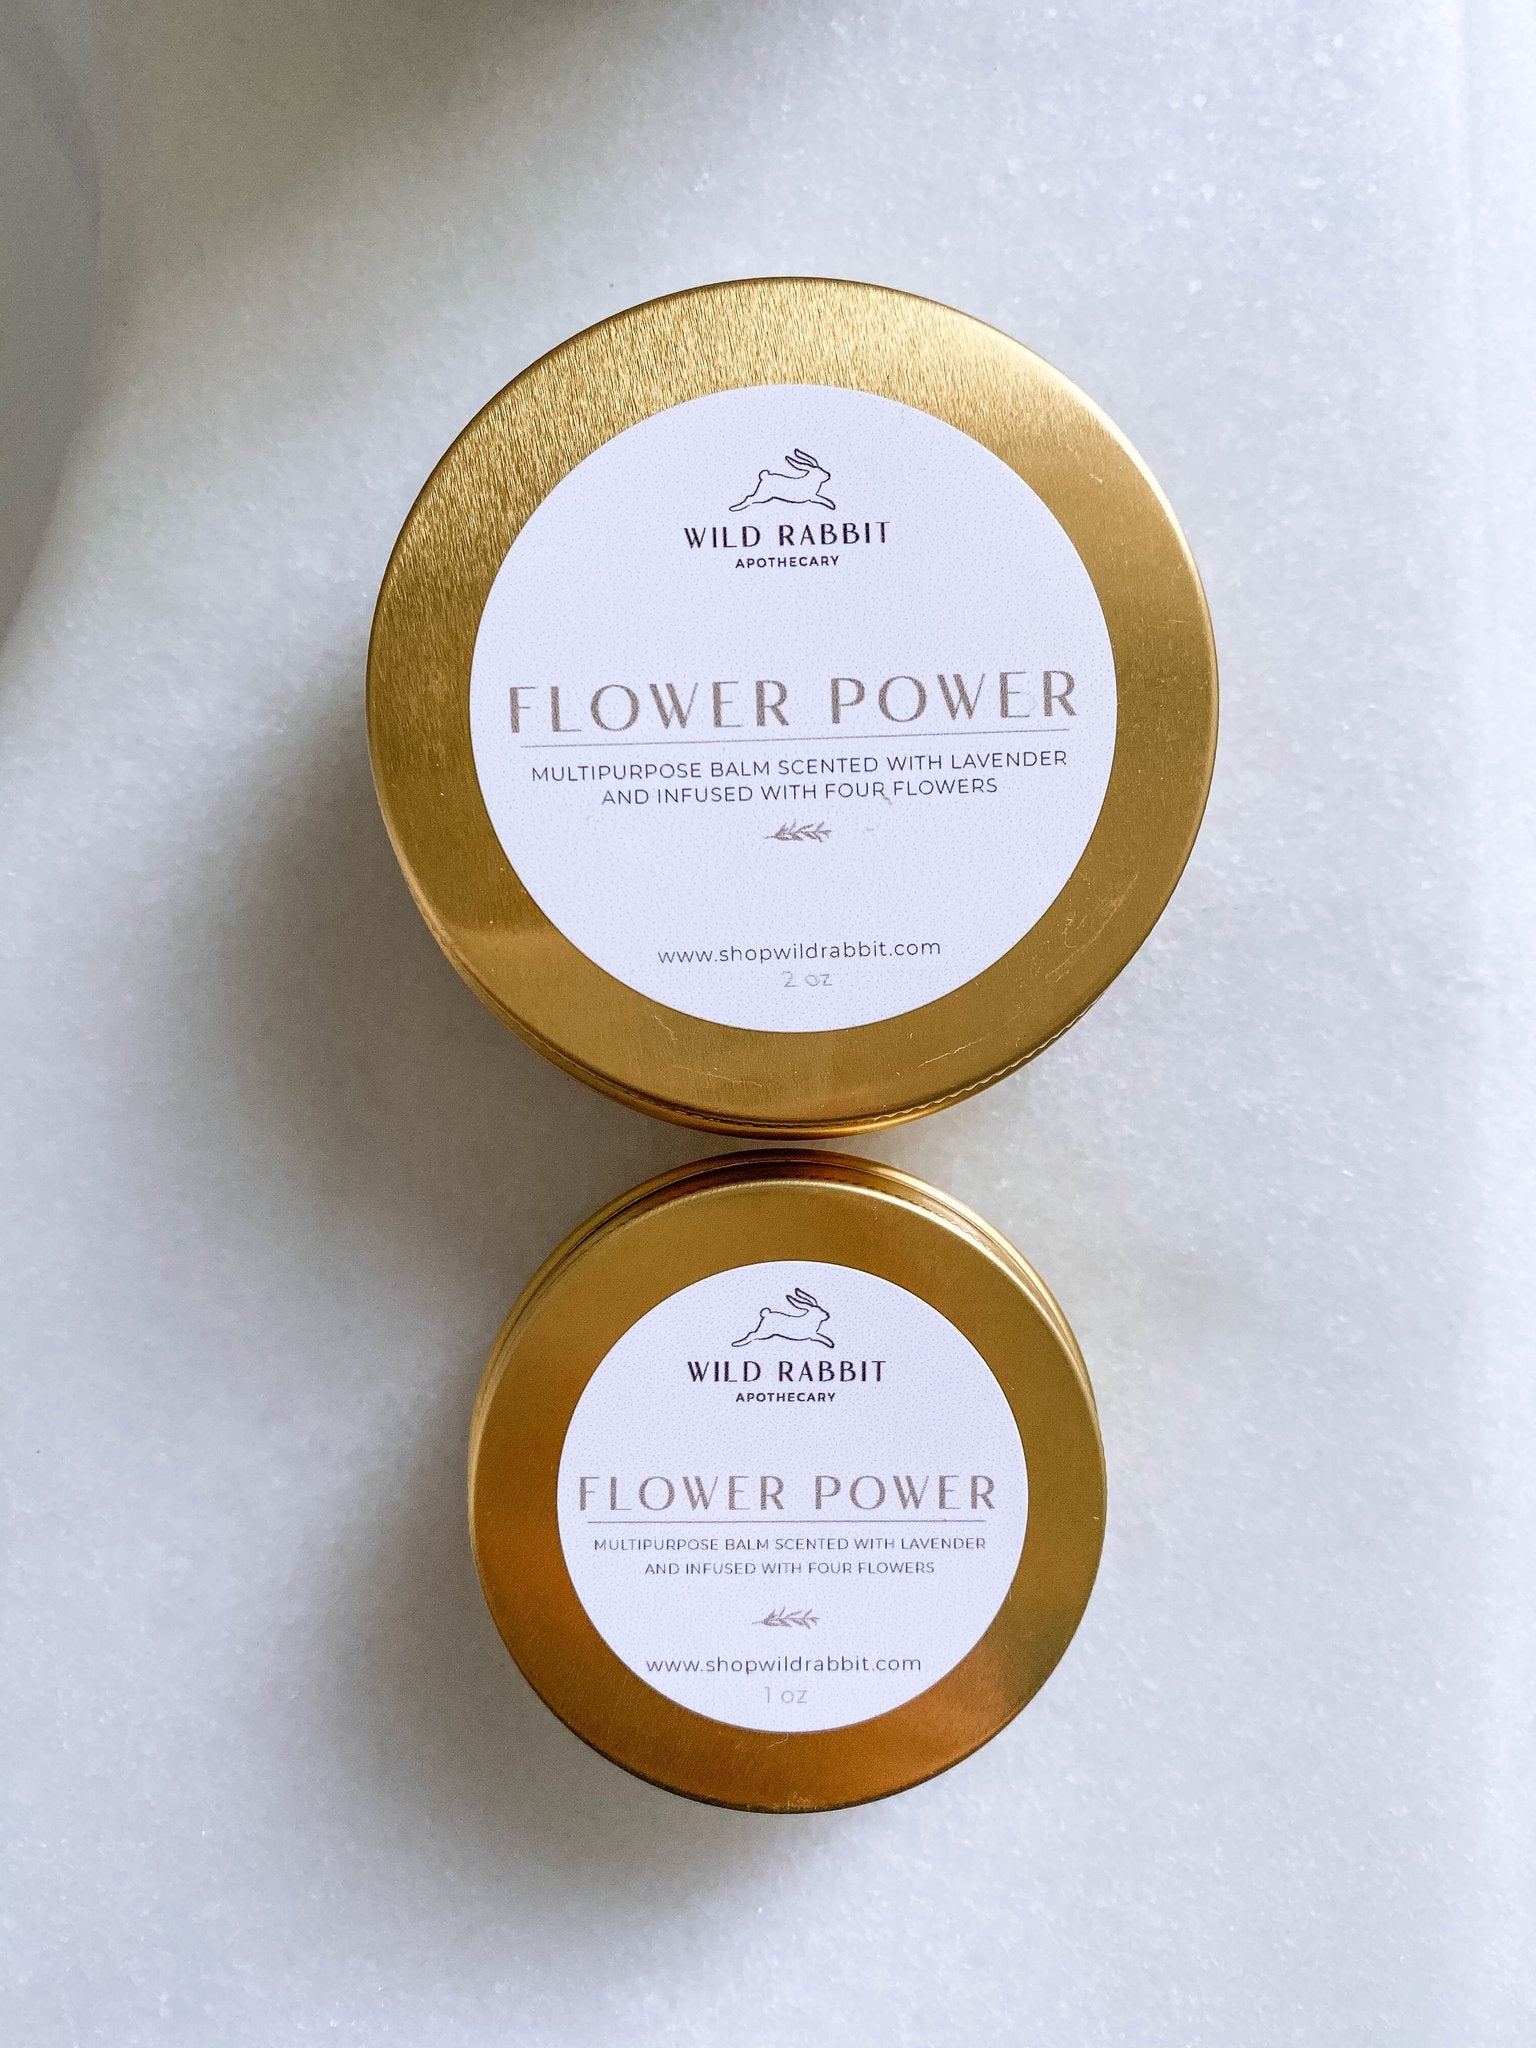 Wild Rabbit Flower Power Balm: Multipurpose Herbal Balm Scented with Lavender and Infused with Flowers